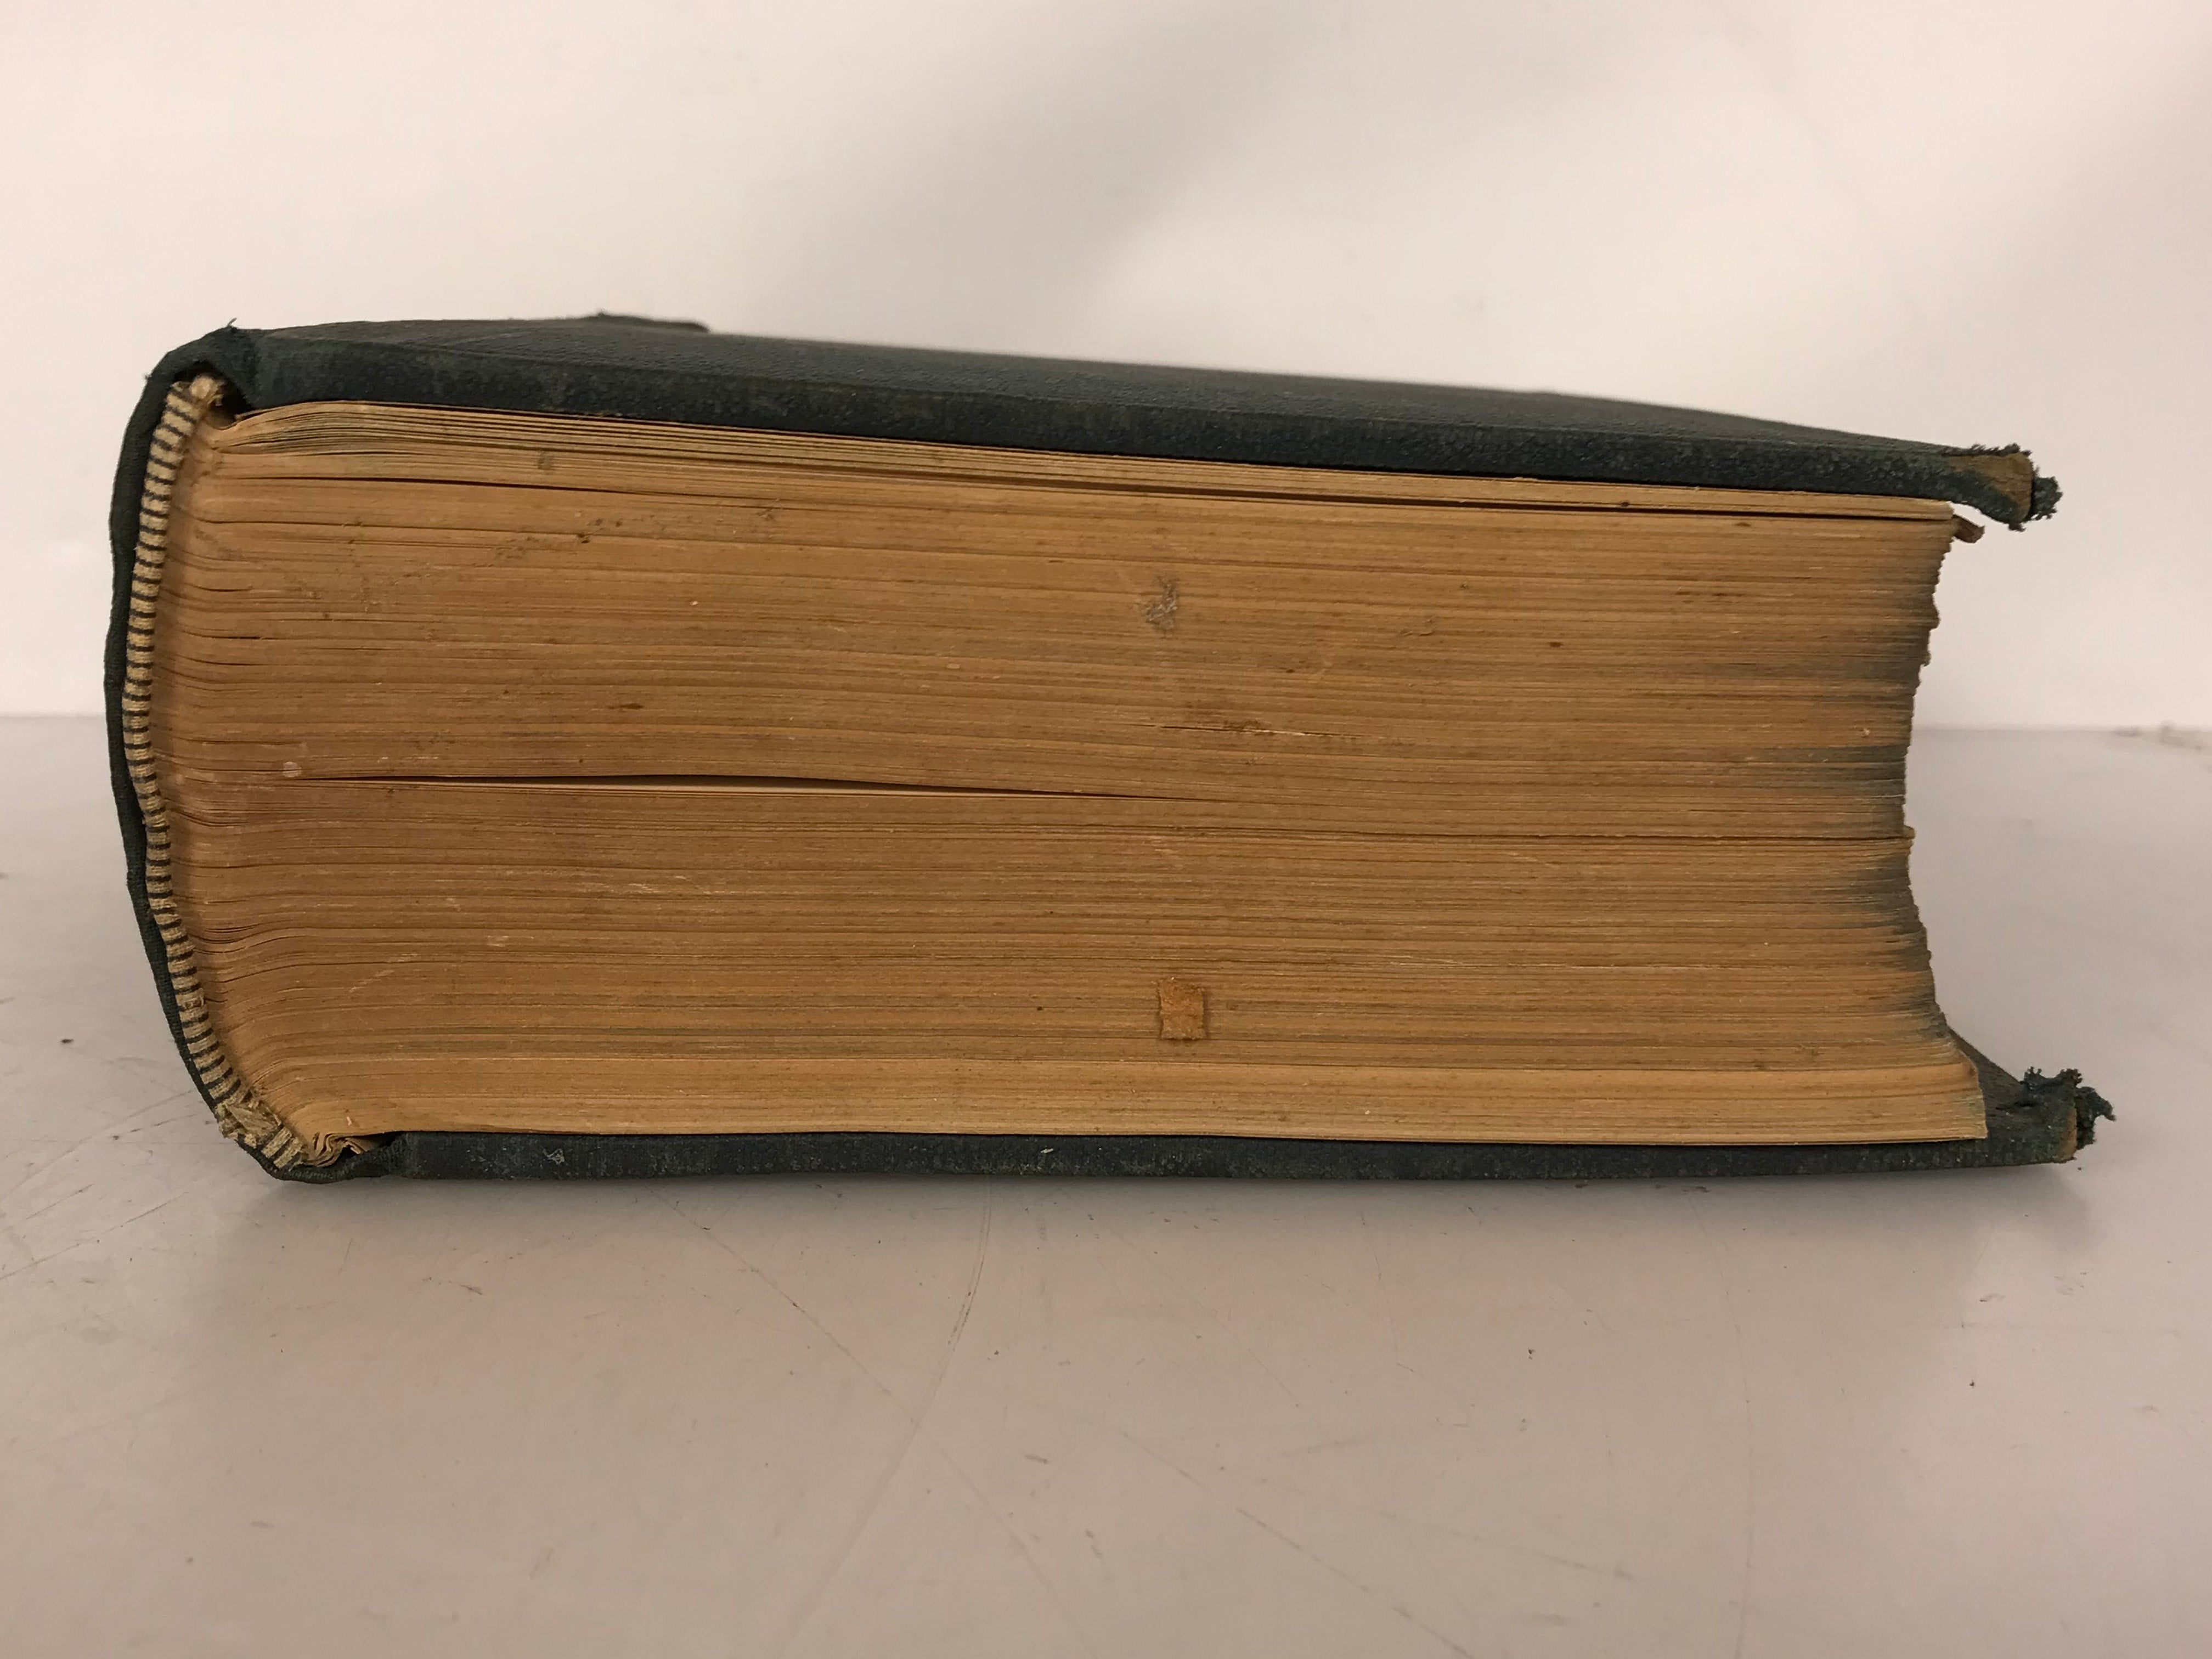 An American Text-Book of Surgery Keen and White 1893 HC